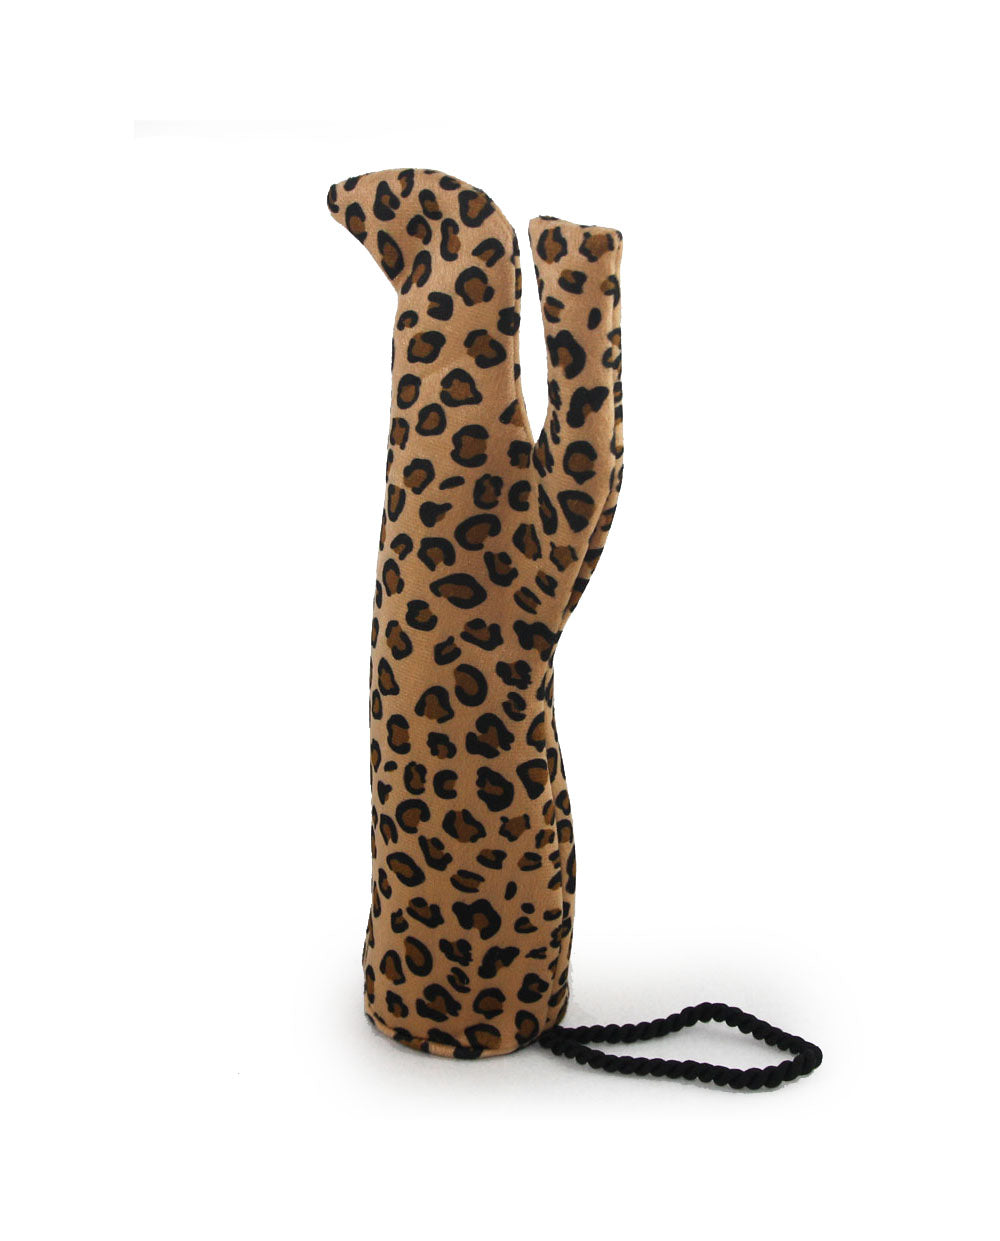 Leopard Print Gifts for Women - Leopard and Cheetah Print Heating/Cooling  Sleep Mask Gift Set, with Gel Pack and Aromatherapy Lavender Insert. Badass  Women Gift. Cheetah Print Gifts for Women : Amazon.com.au: